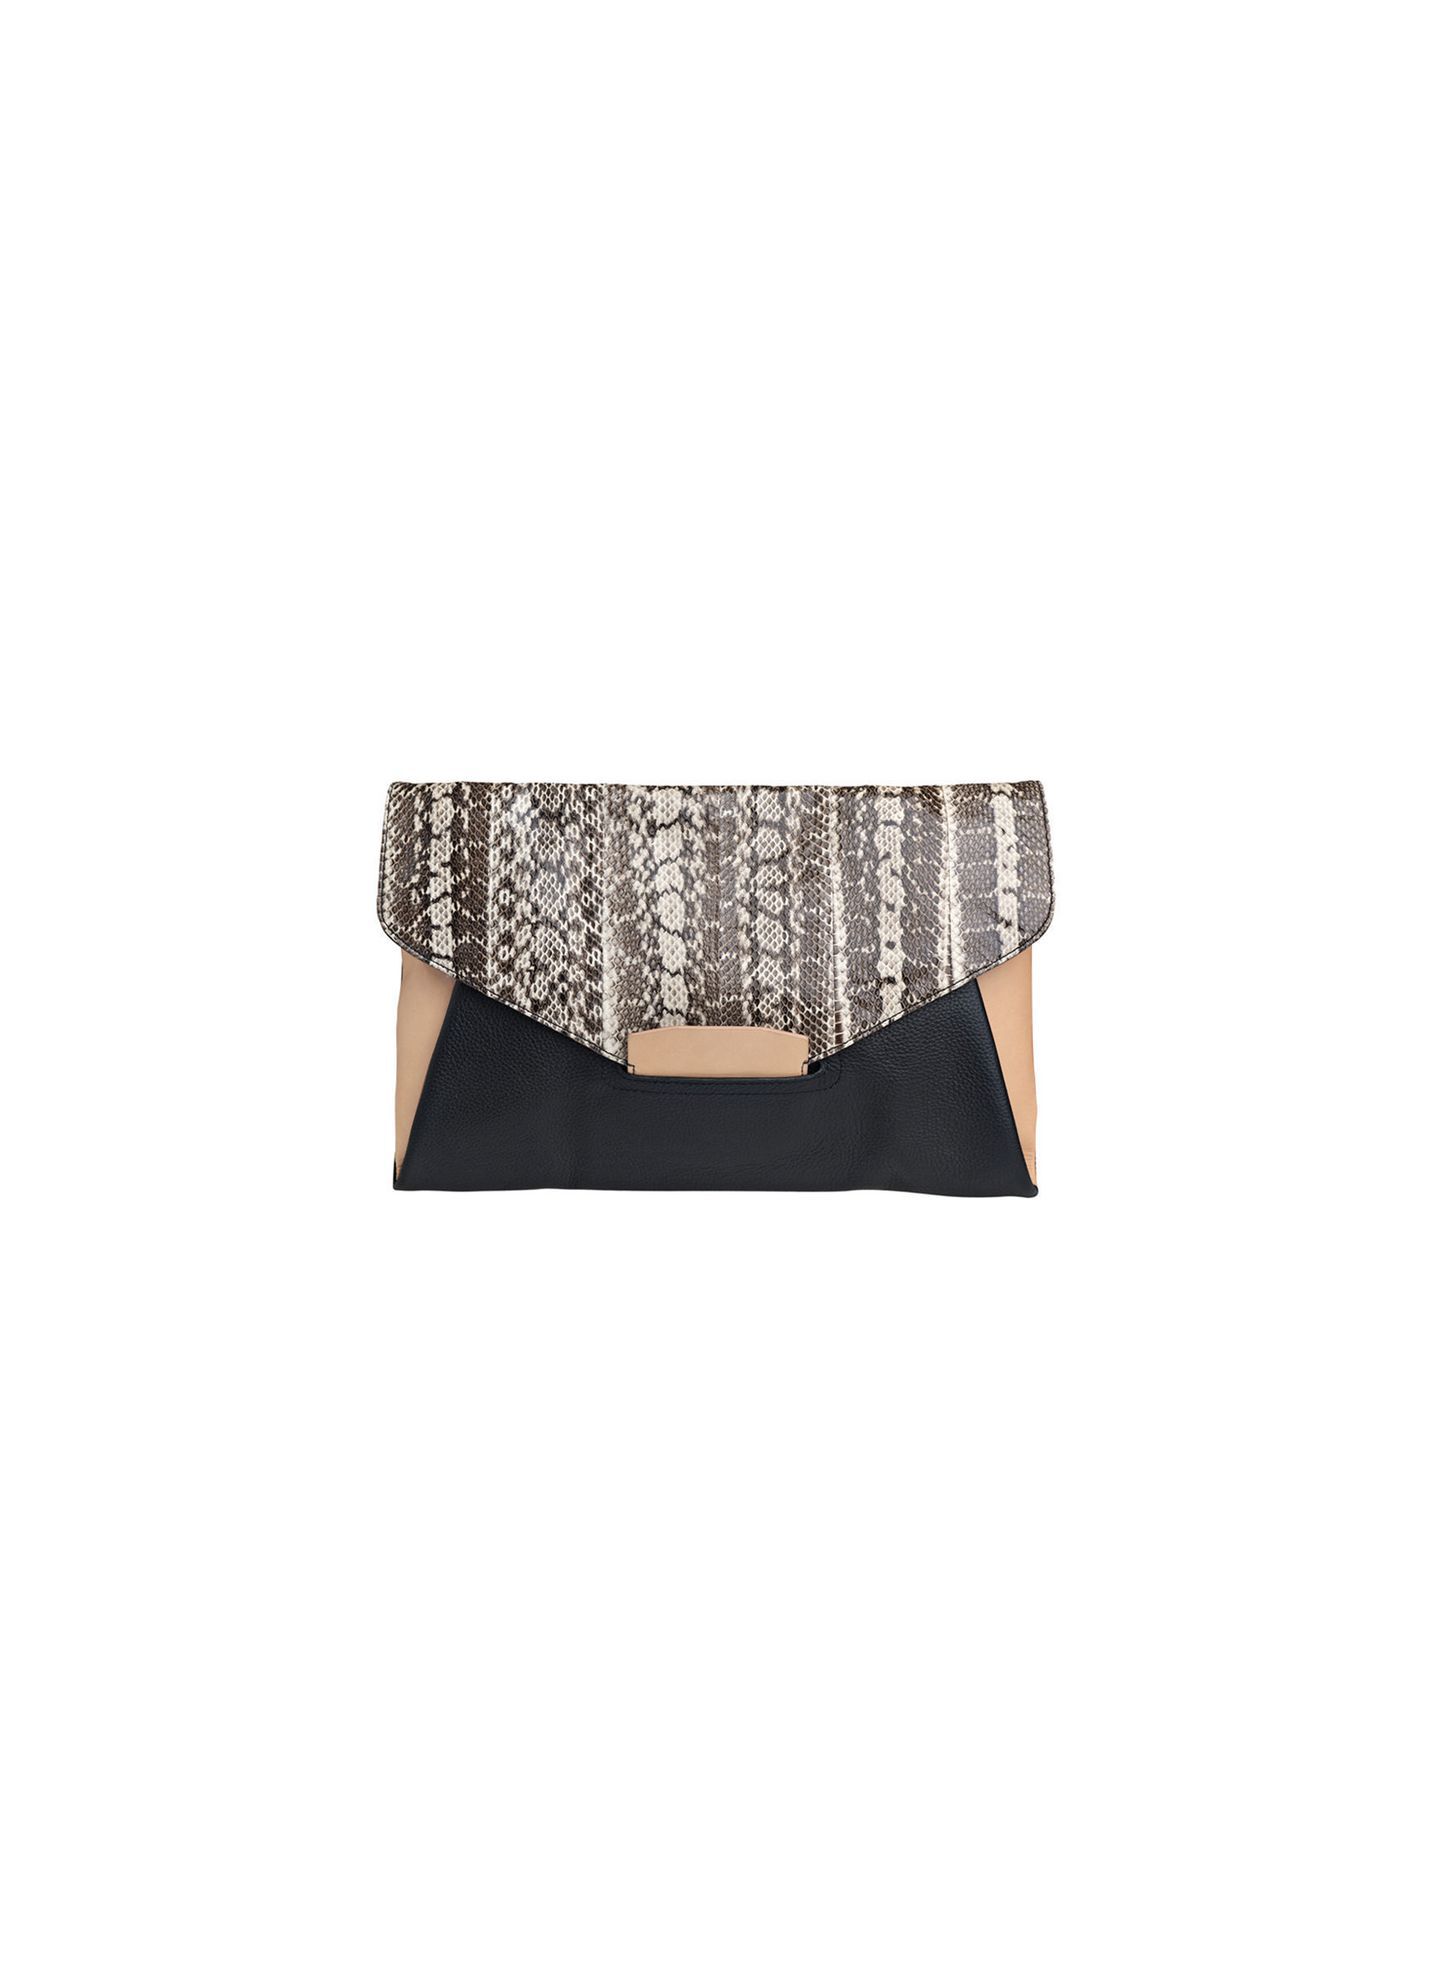 By Malene Birger, Isol leather clutch ,